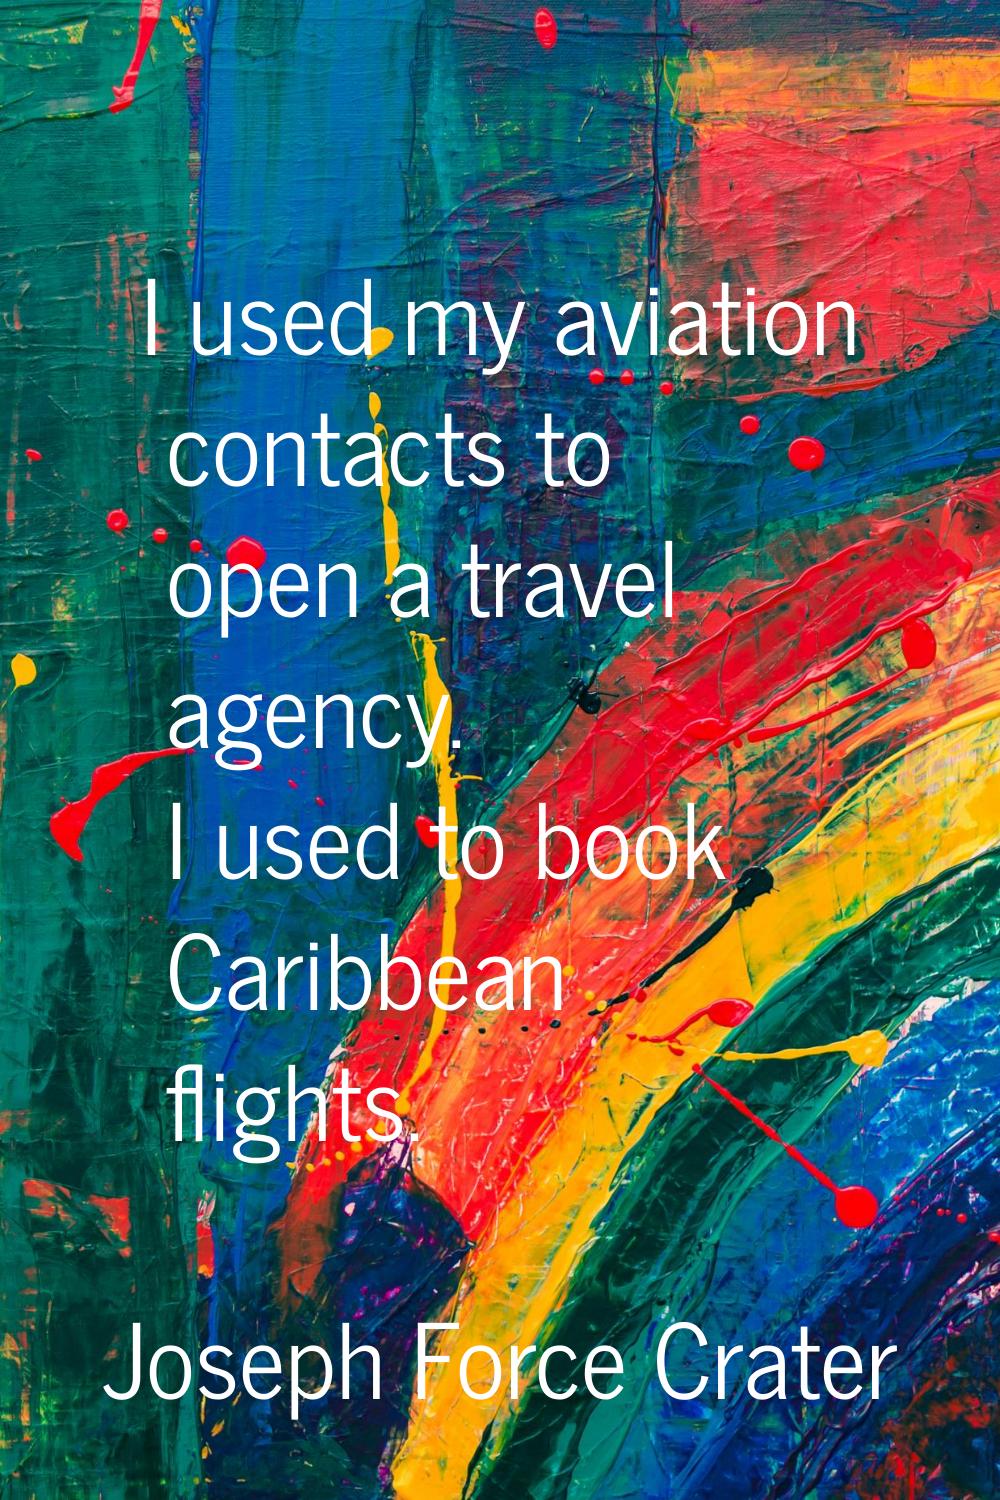 I used my aviation contacts to open a travel agency. I used to book Caribbean flights.